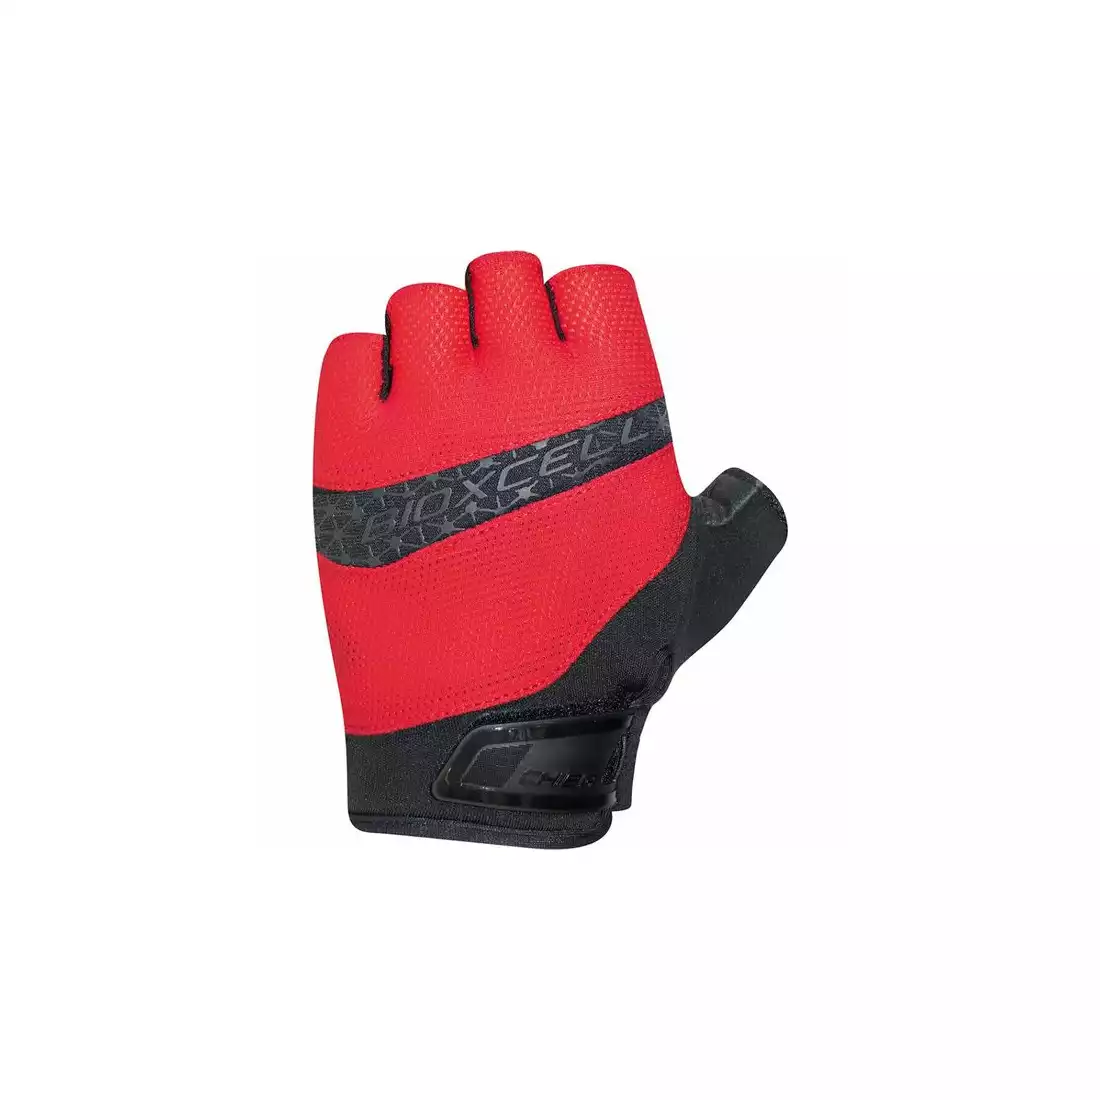 CHIBA BIOXCELL PRO Fahrradhandschuhe Rot